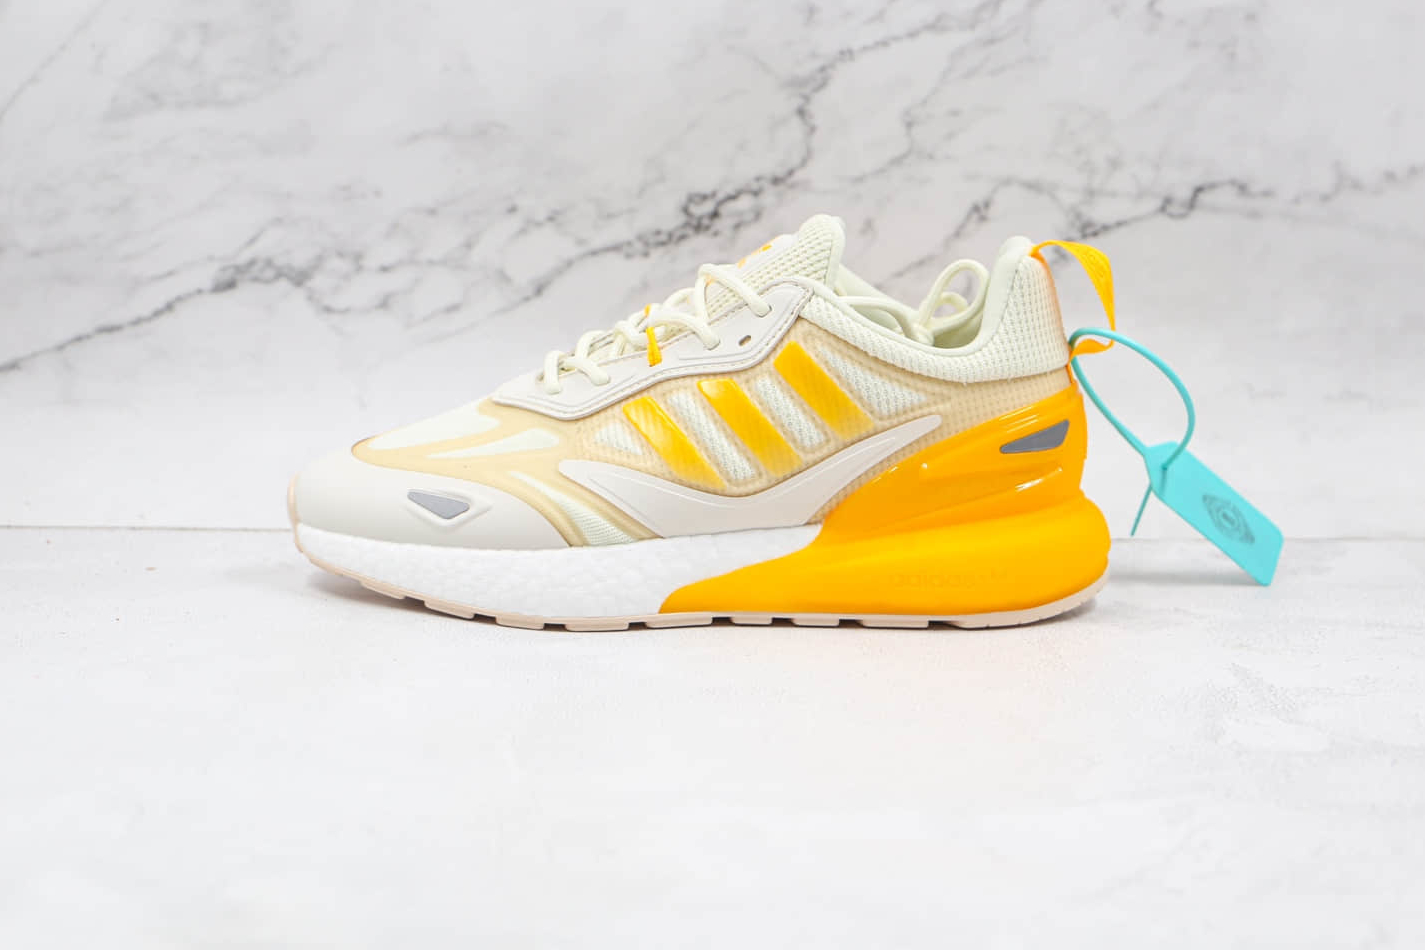 Adidas Originals ZX 2K Boost 2.0 'Wonder White Orange Tint' GZ7823 - Stylish and Comfortable Sneakers